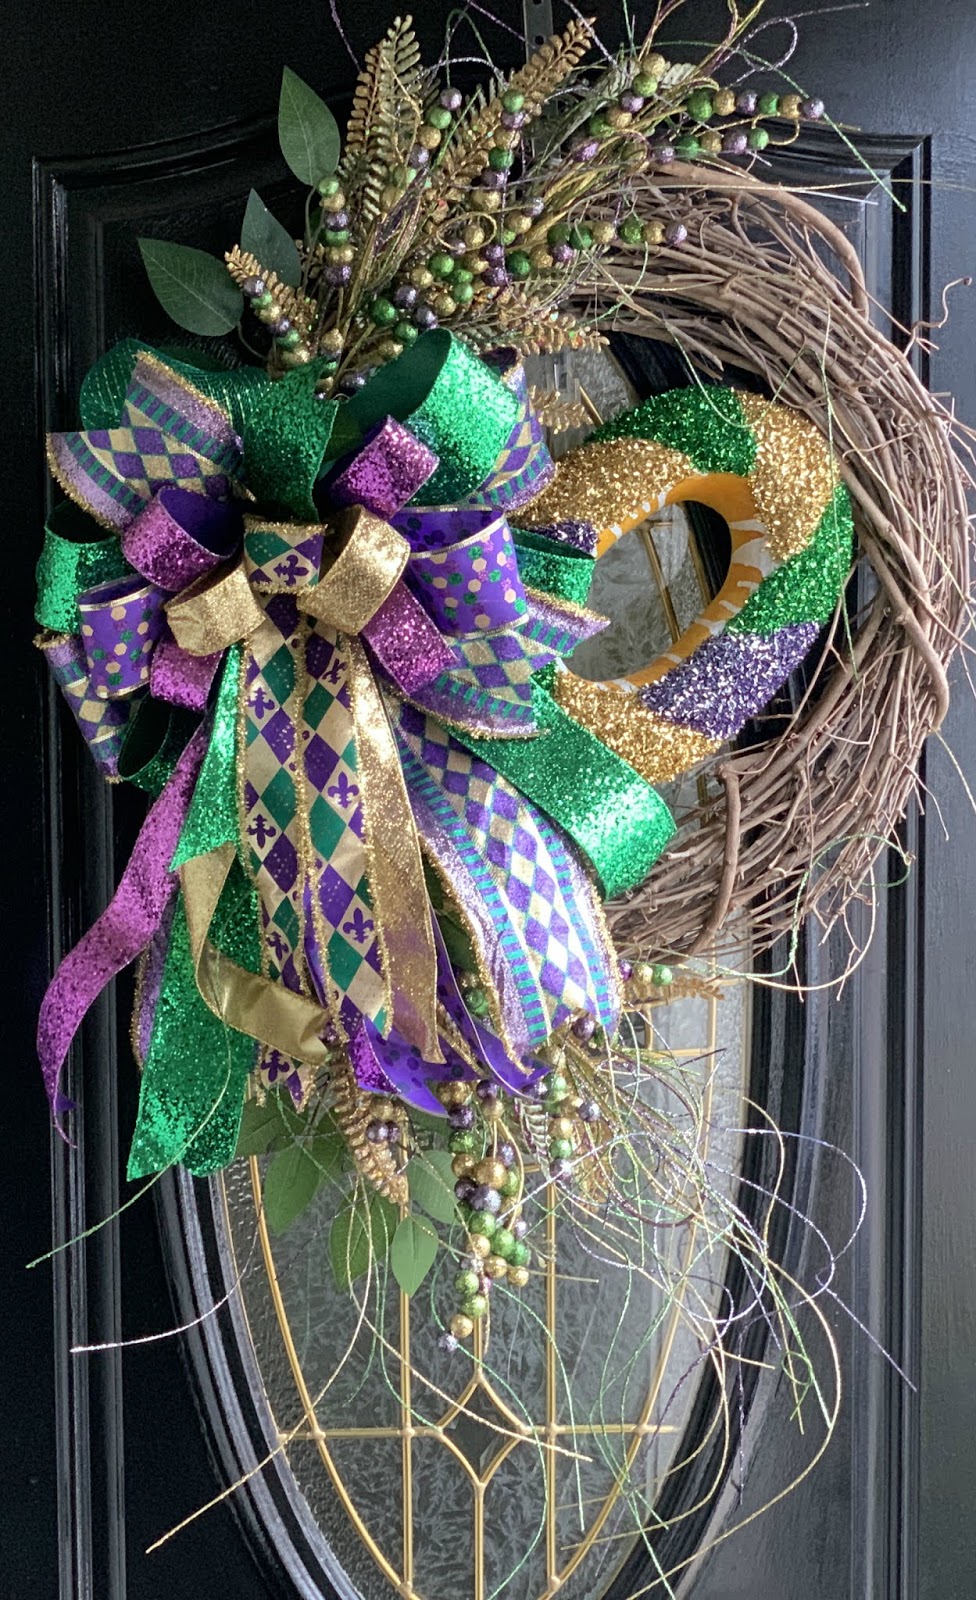 Mardi Gras Baubles Ribbon | Holiday & Occasion Party Supplies